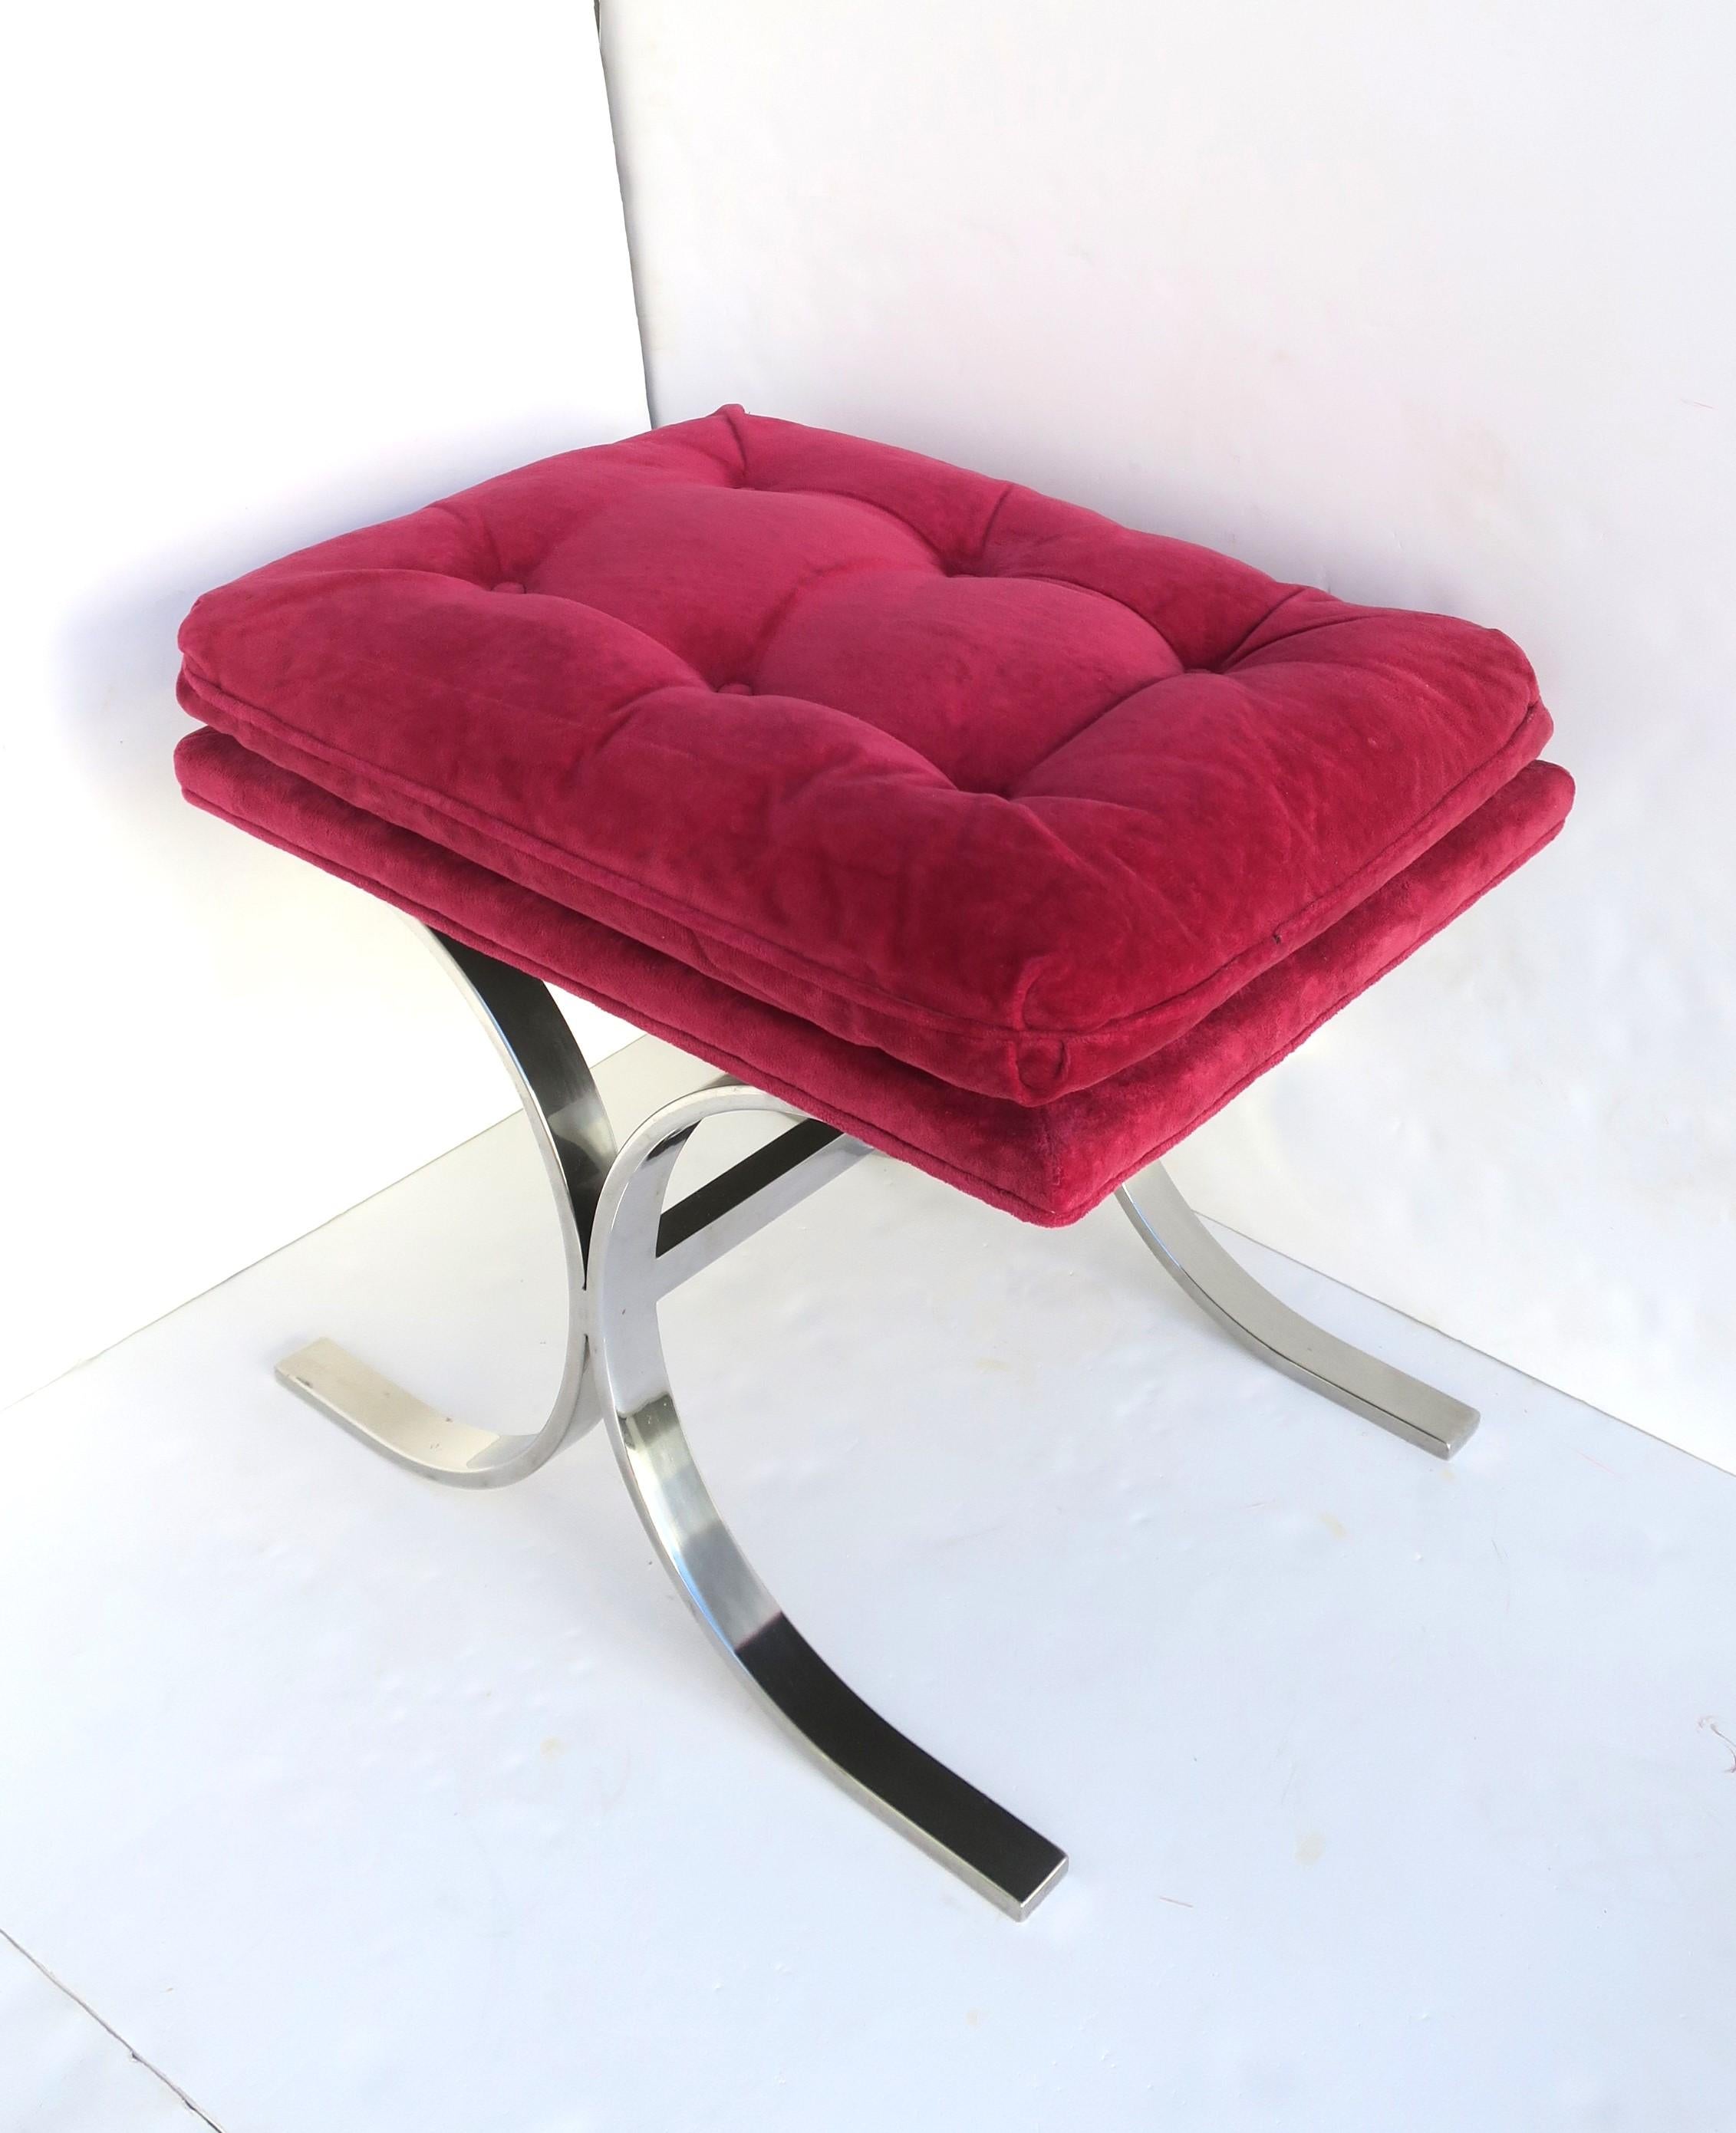 A chrome bench with upholstered magenta pink seat, '60s '70s Modern / Hollywood Regency style, after designer Milo Baughman, circa late-20th century, USA. A single seat bench with a curved soft line 'X' chrome frame and a cotton velvet tufted seat